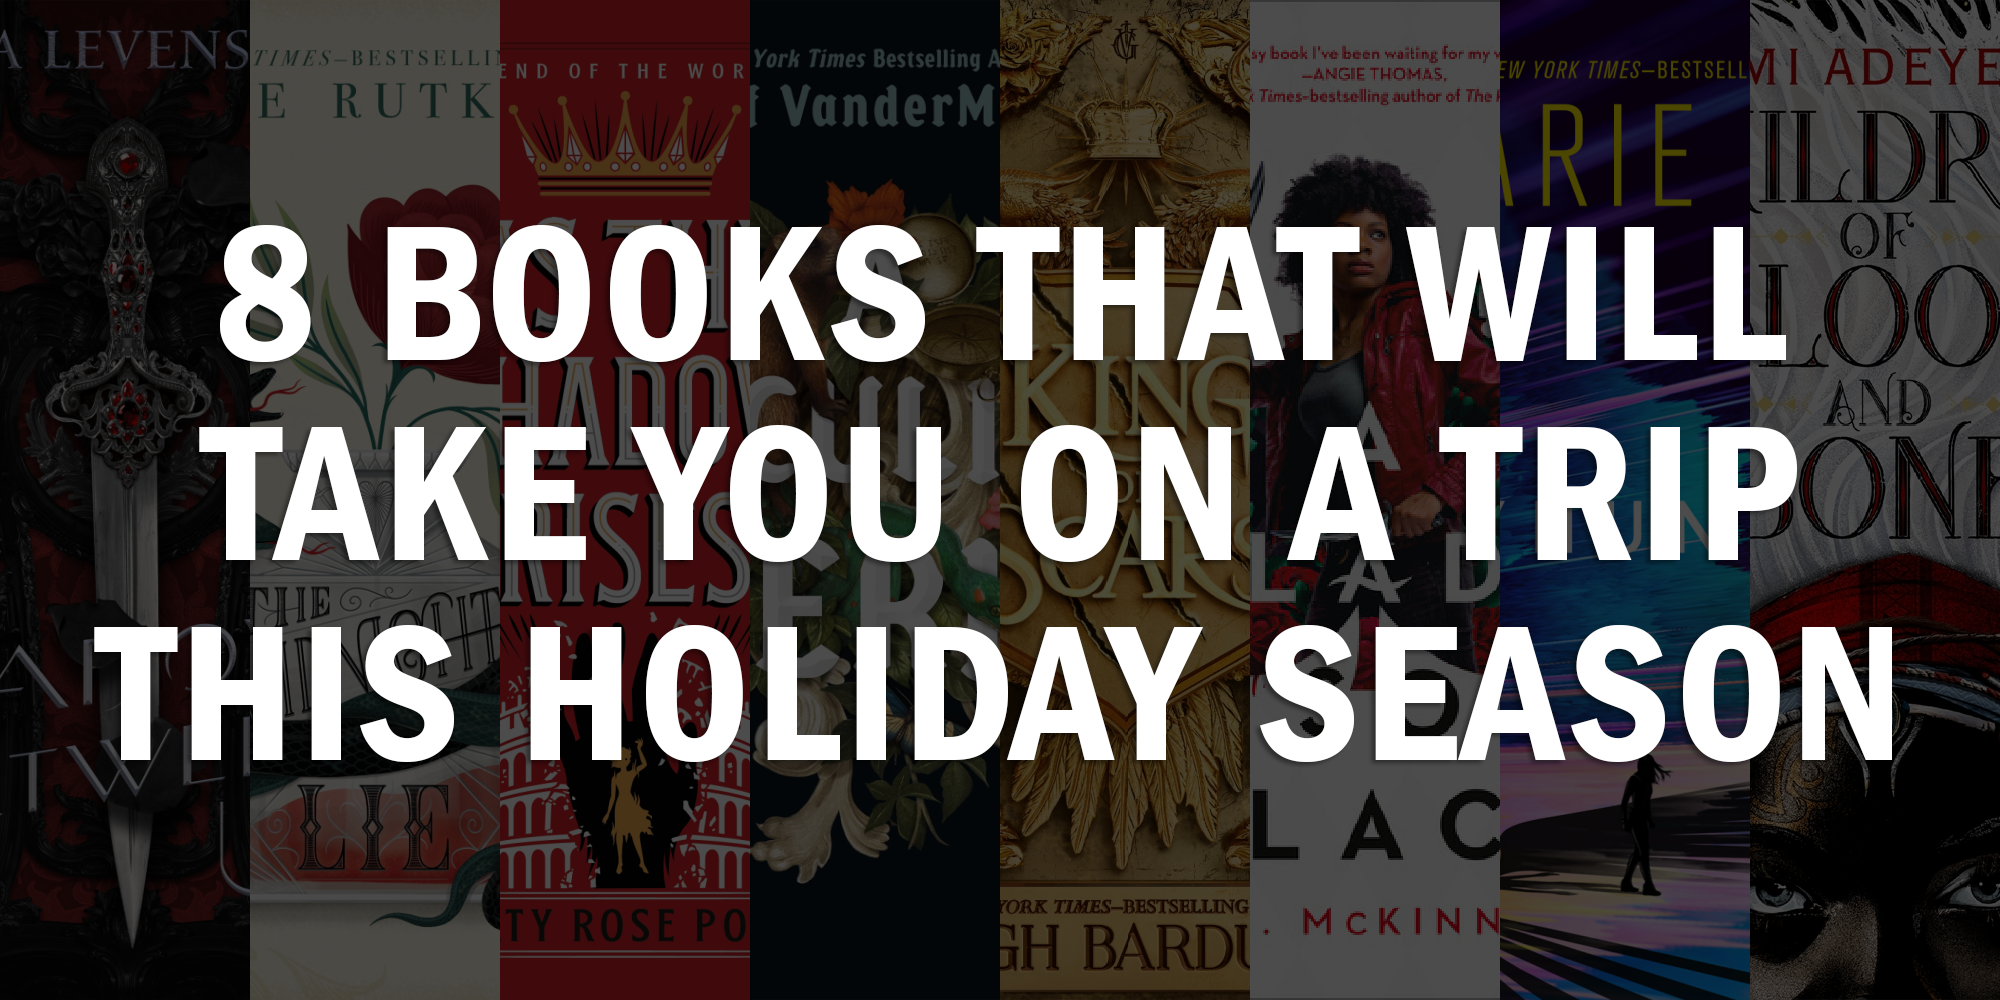 8 Books That Will Take You On a Trip This Holiday Season